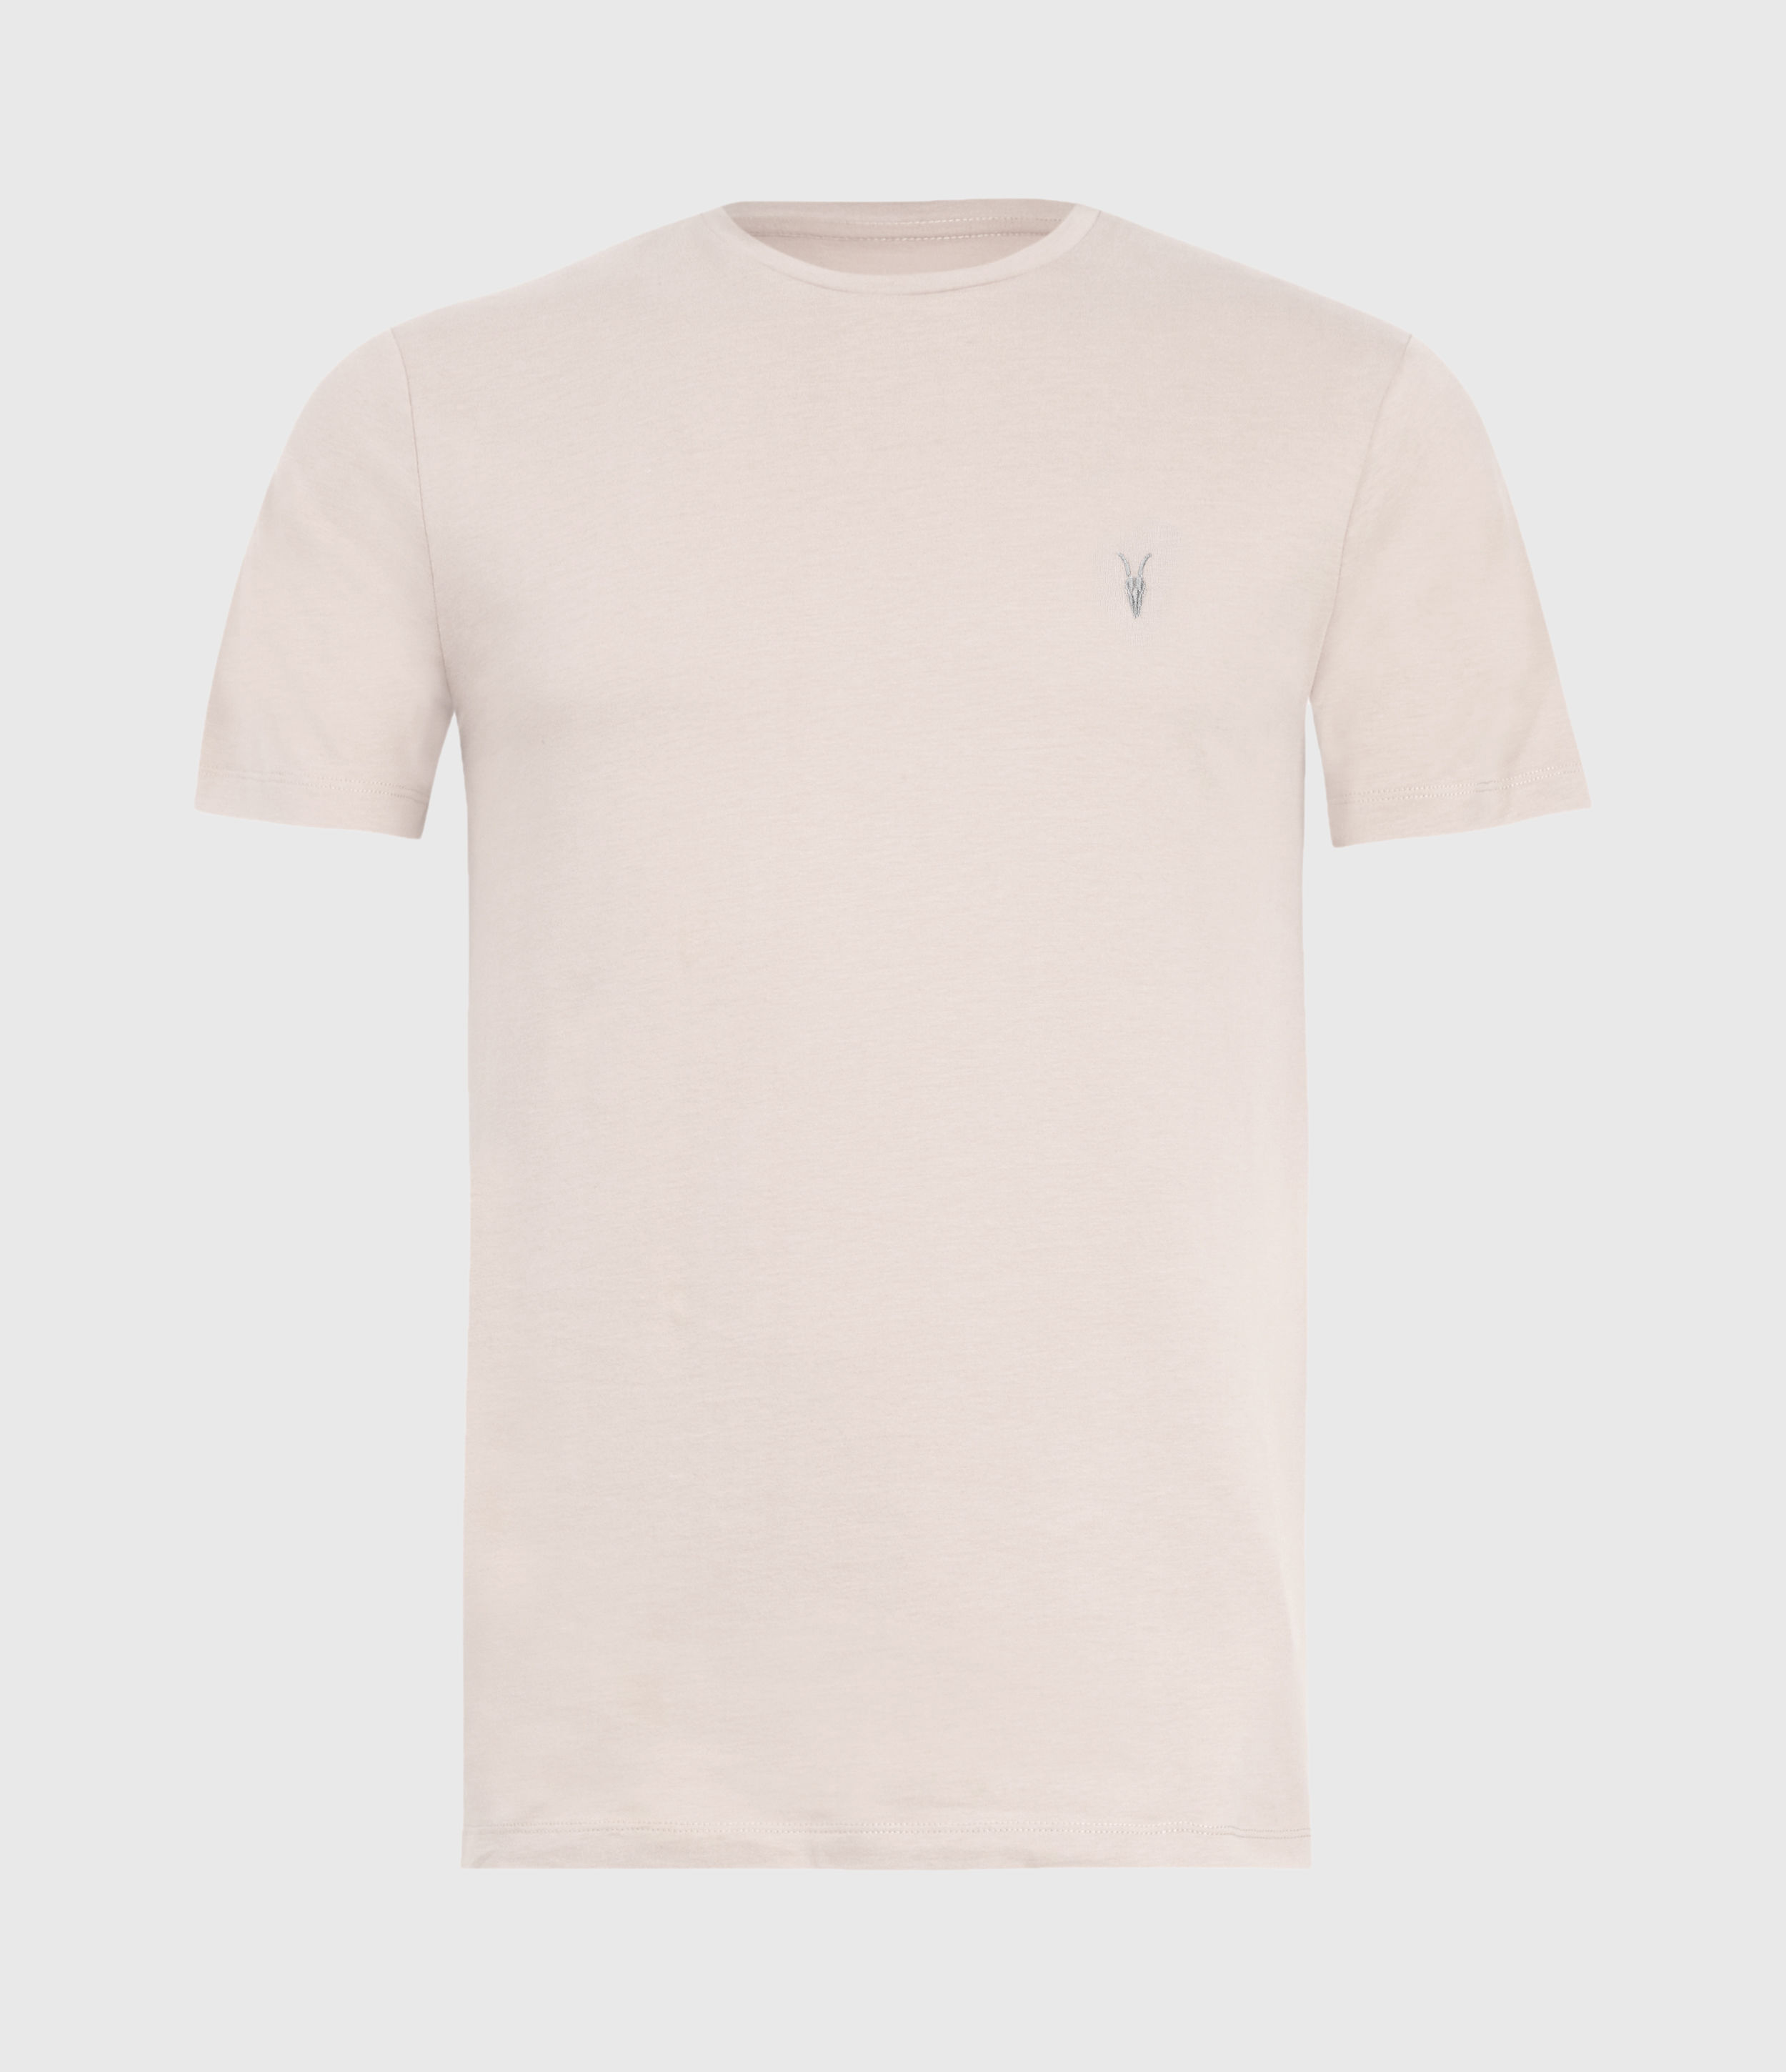 Allsaints Brace Crew T-shirt 3 Pack In Blossom Pink